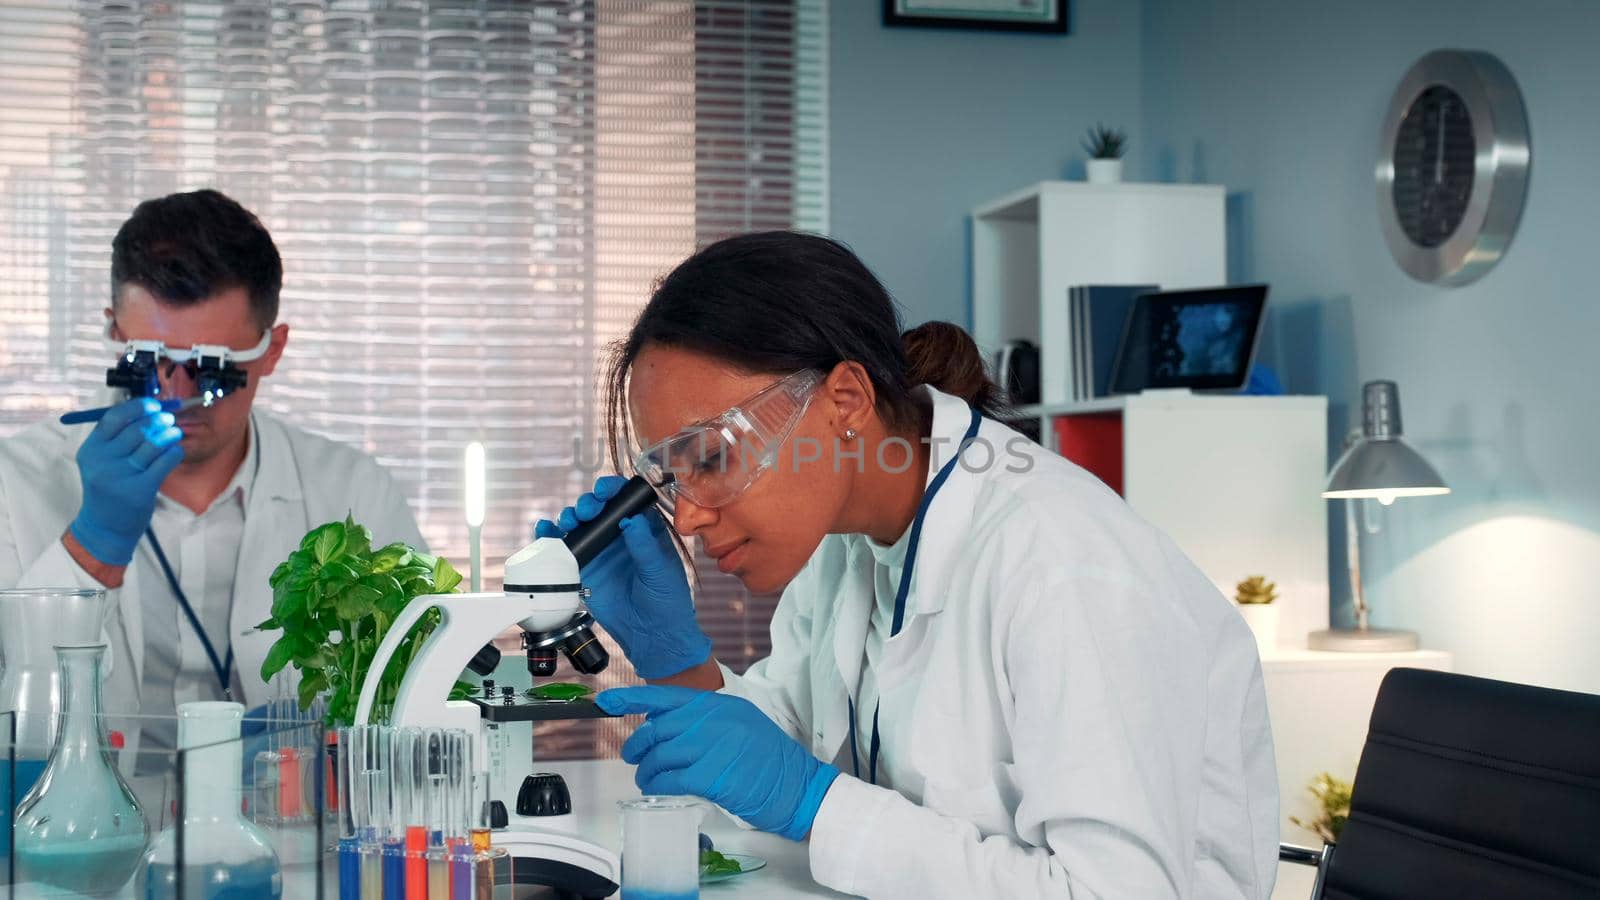 In modern research laboratory black female scientist looking at organic material under microscope by art24pro